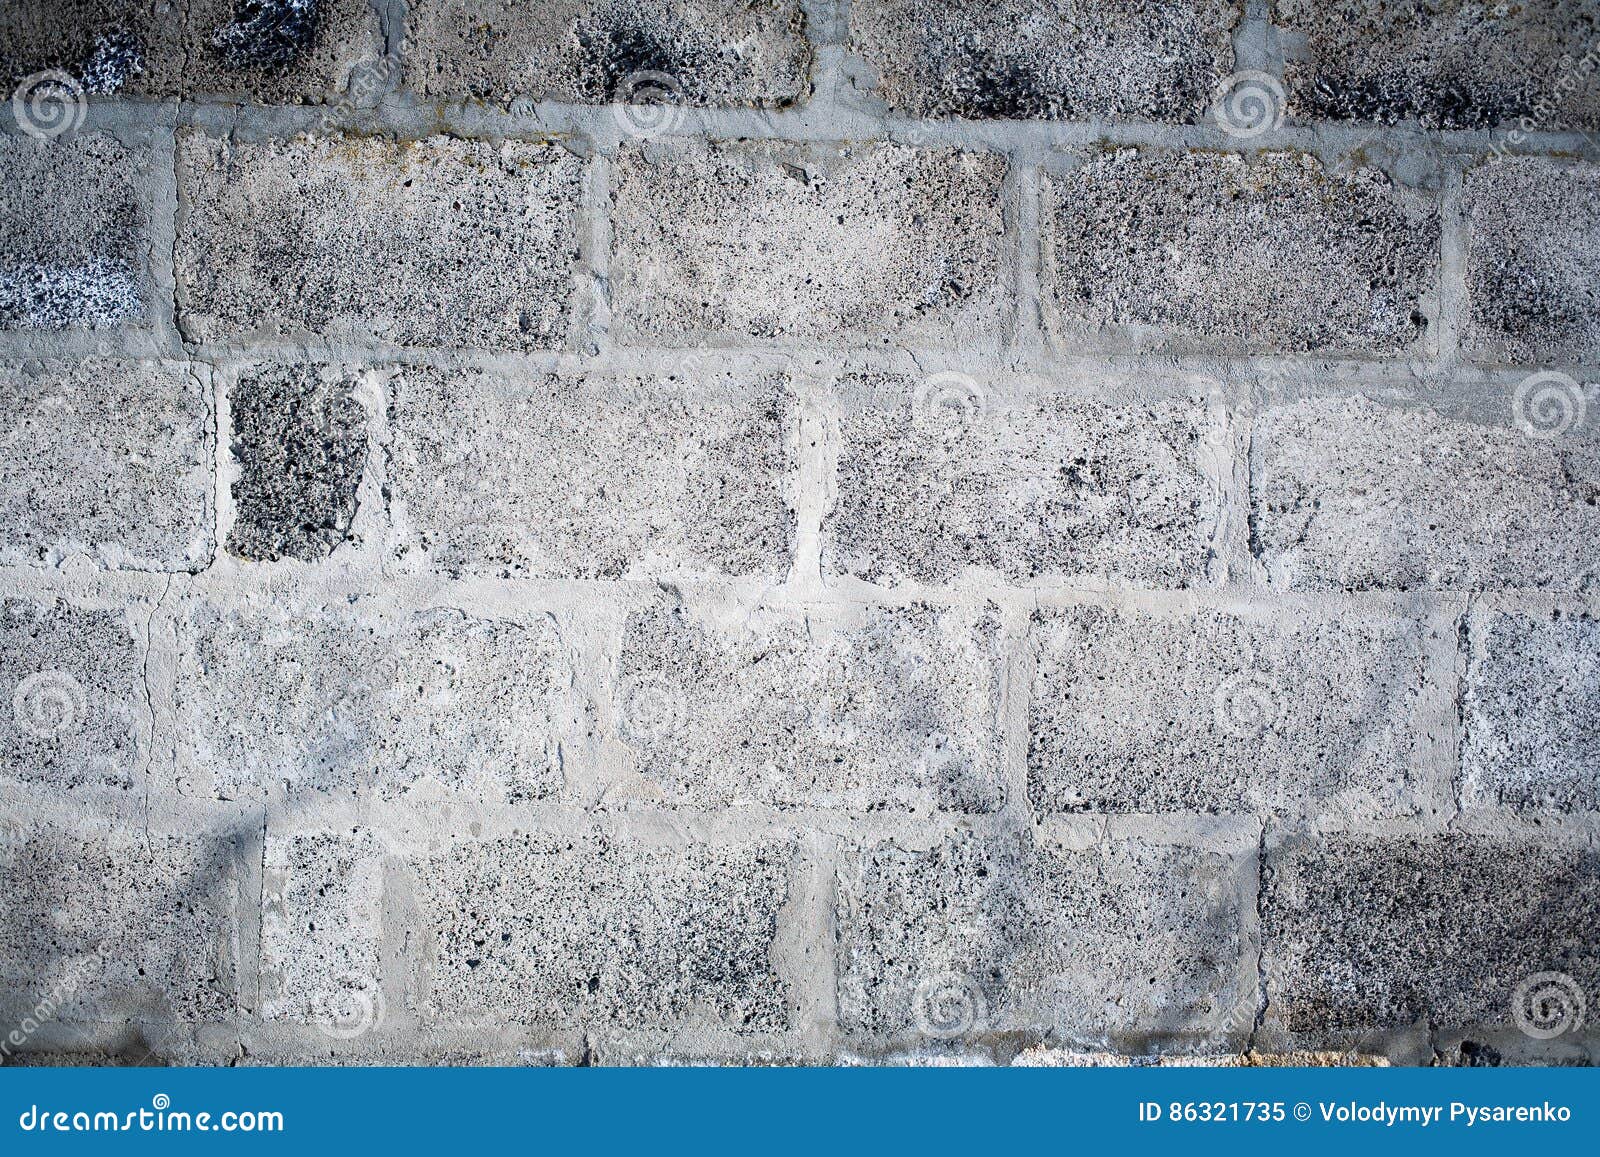 A Cinder Block Wall Background Stock Image - Image of construction